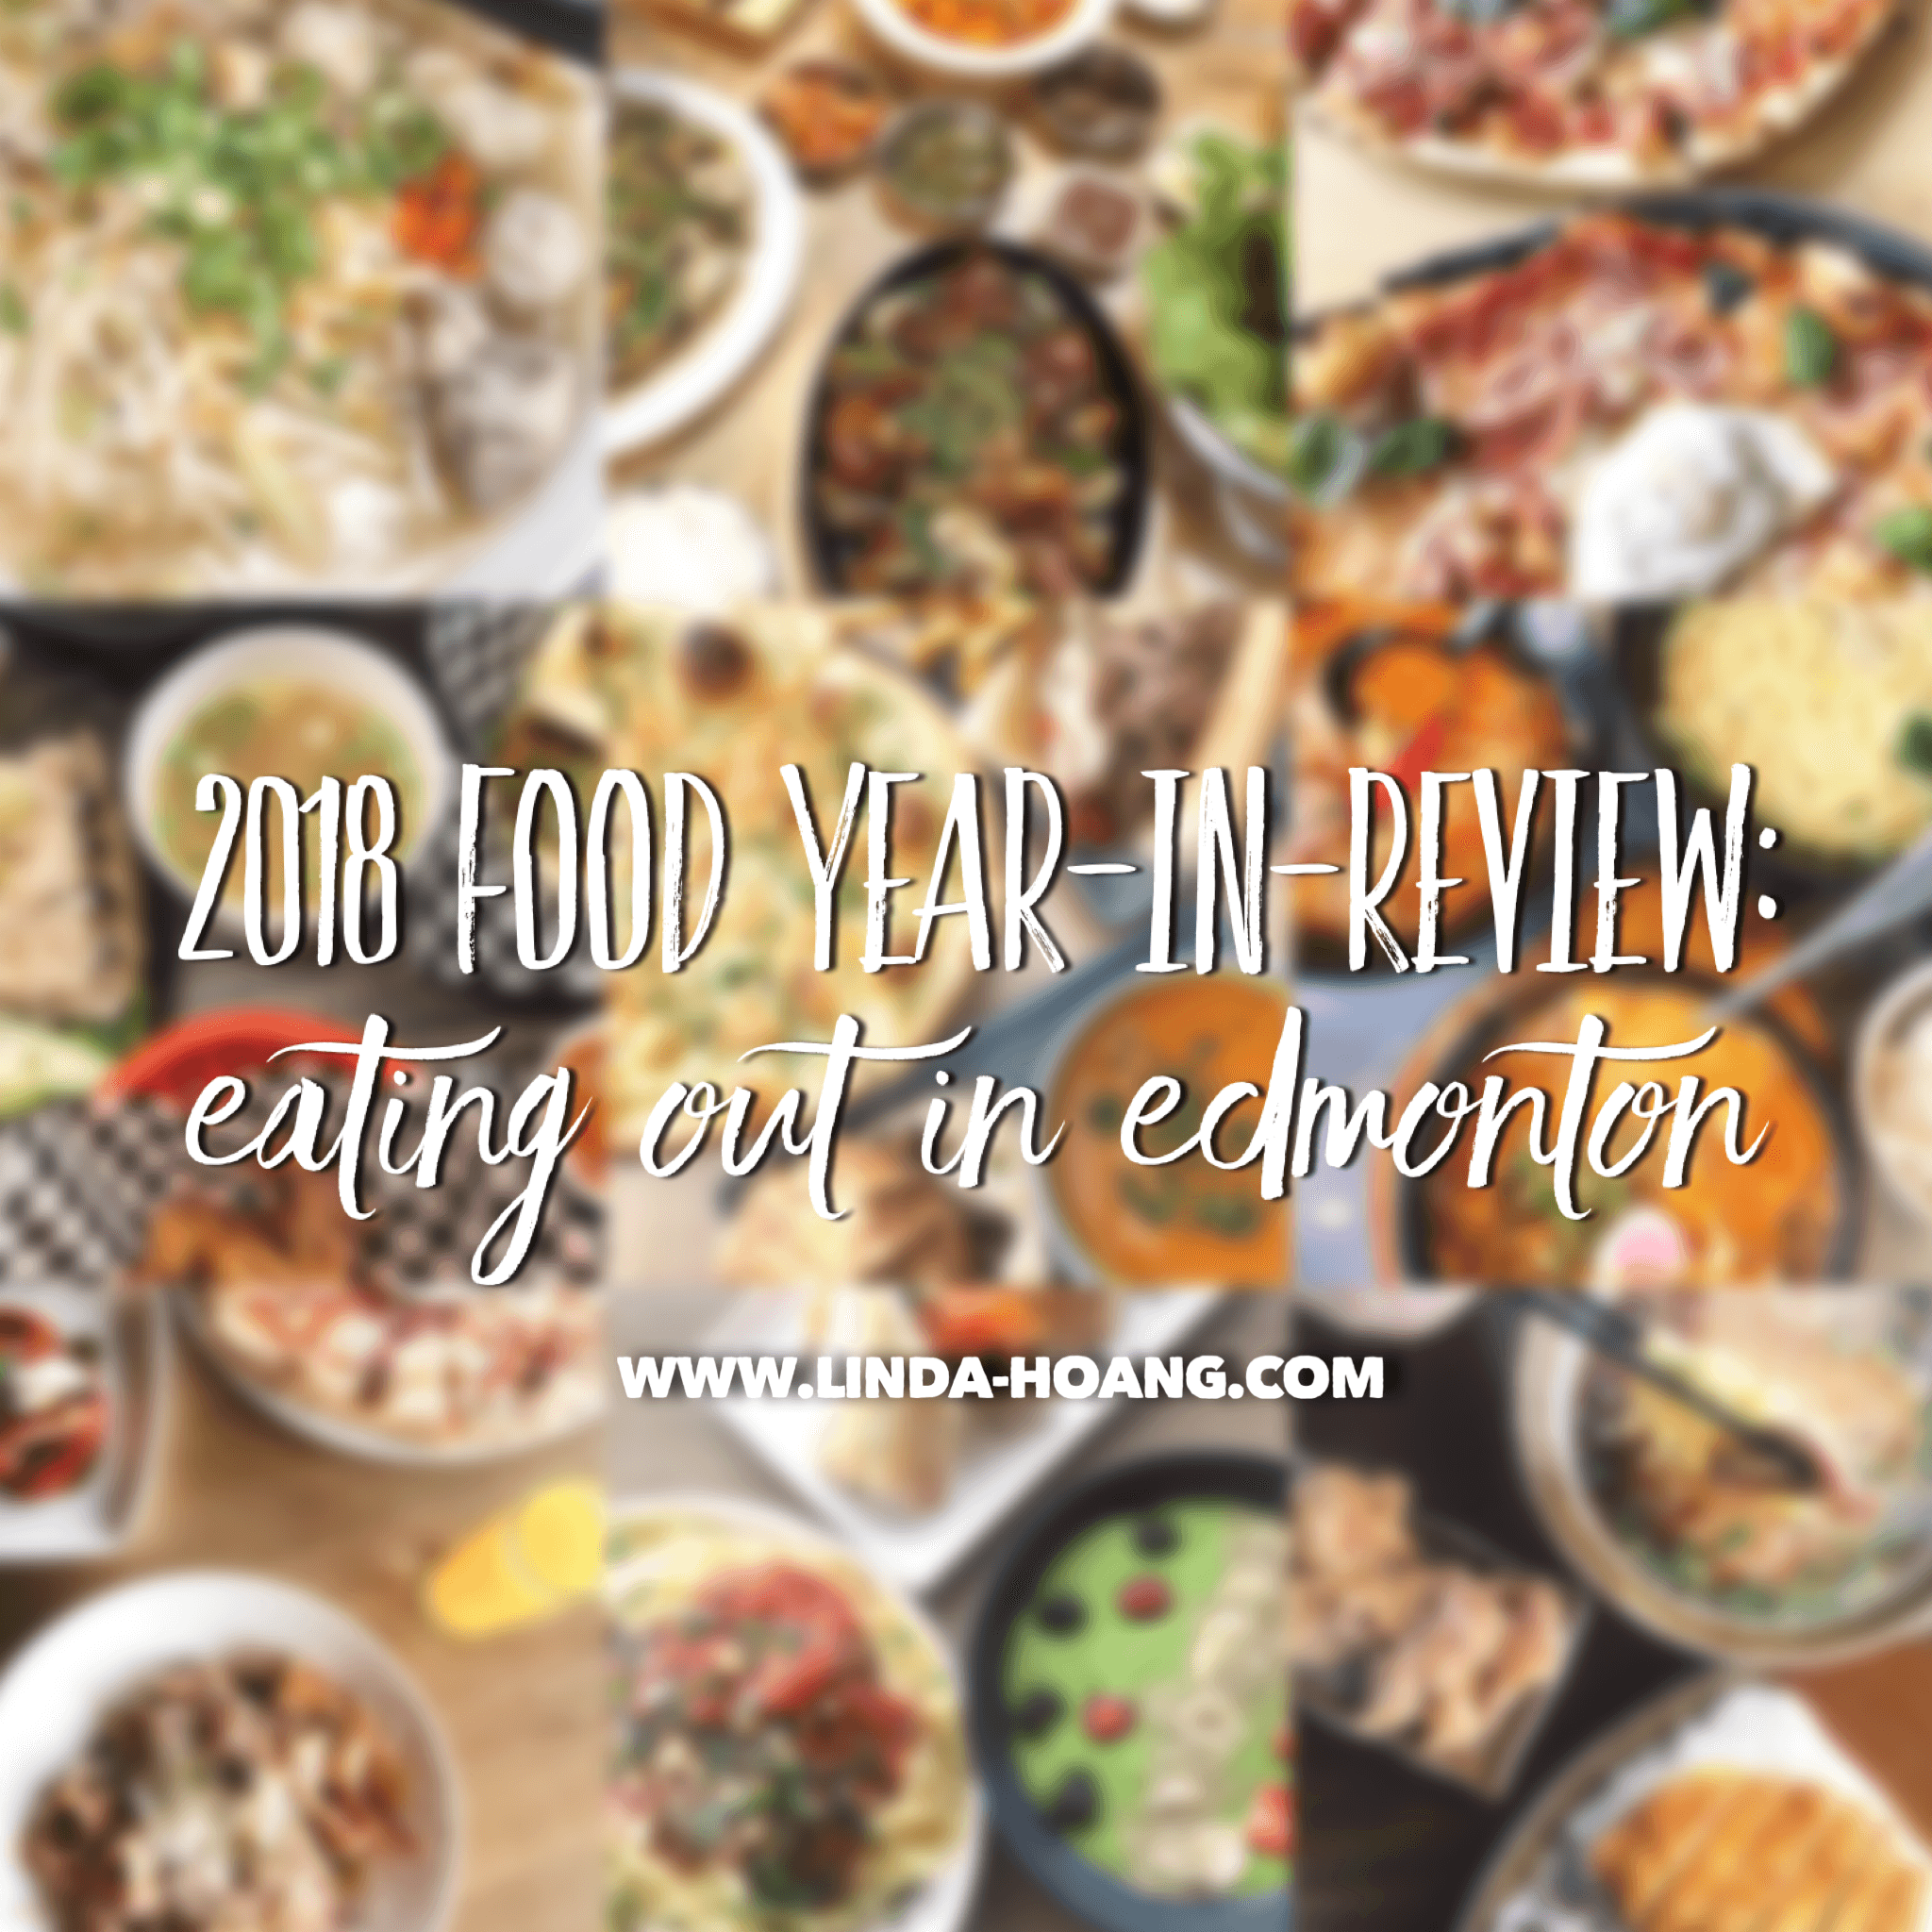 2018 Food Year in Review Explore Edmonton Restaurants Eating Out